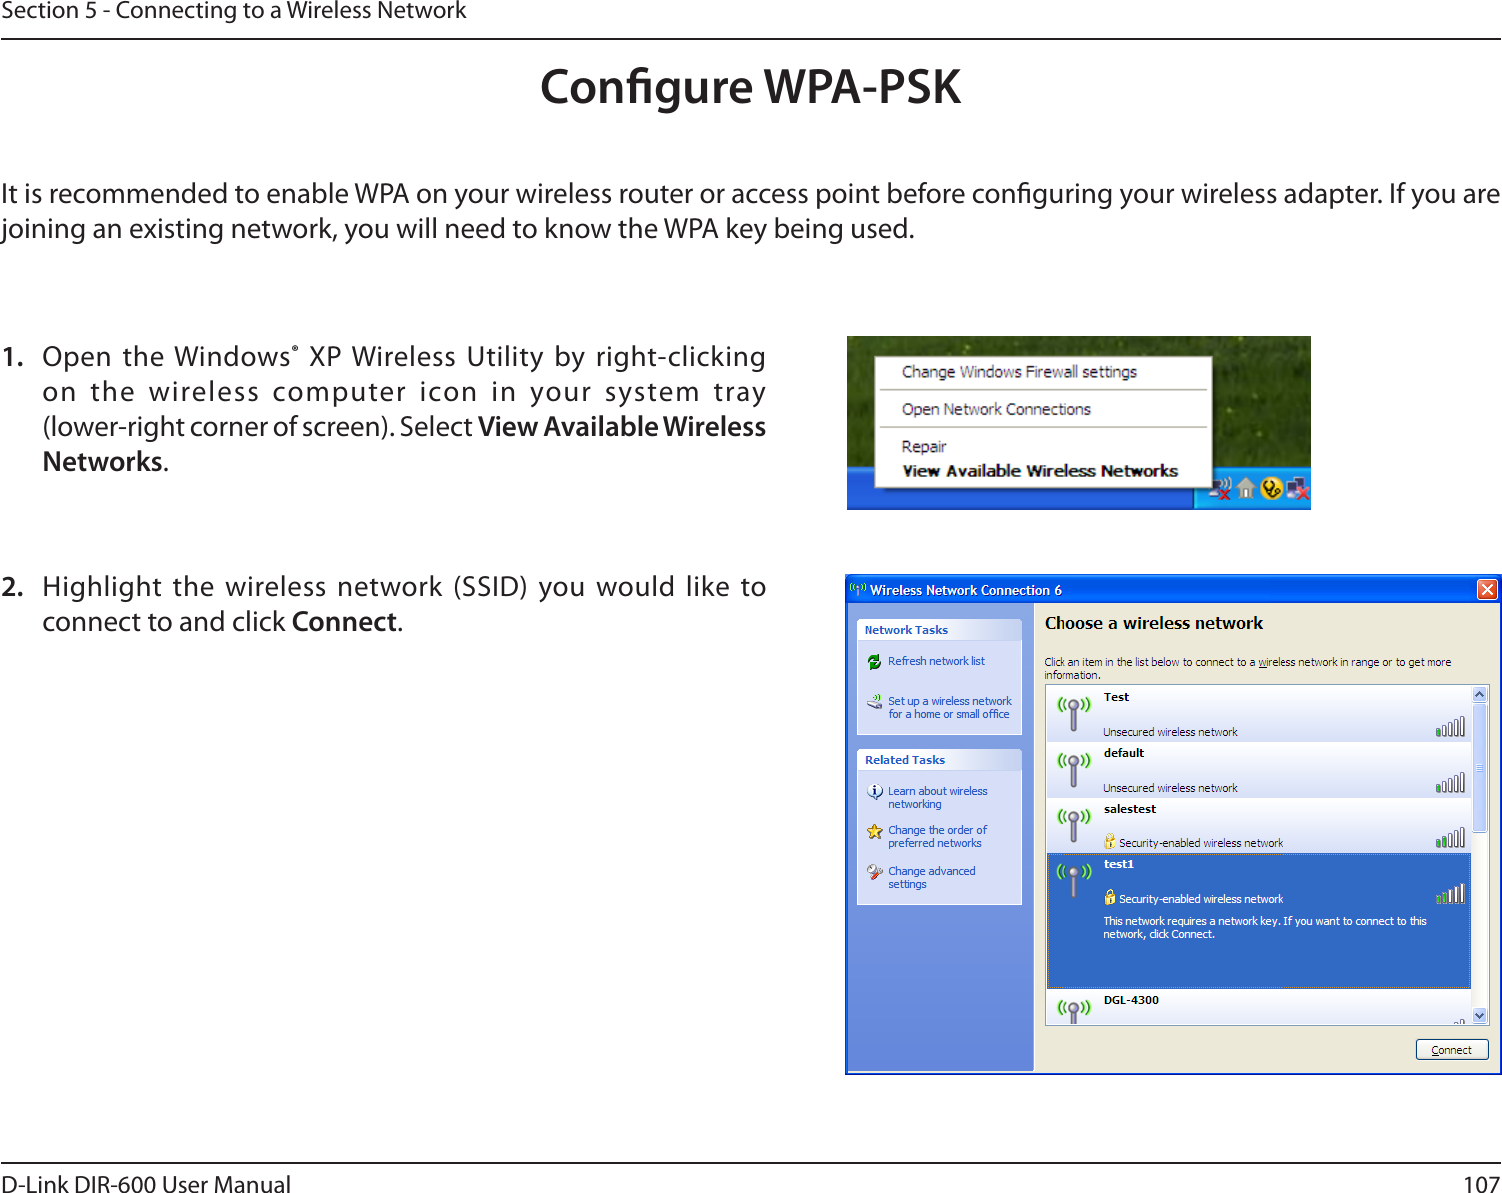 107D-Link DIR-600 User ManualSection 5 - Connecting to a Wireless NetworkCongure WPA-PSKIt is recommended to enable WPA on your wireless router or access point before conguring your wireless adapter. If you are joining an existing network, you will need to know the WPA key being used.2.  Highlight the wireless network (SSID) you would like to connect to and click Connect.1.  Open the Windows® XP Wireless Utility by right-clicking on  the  wireless  computer  icon  in  your  system  tray  (lower-right corner of screen). Select View Available Wireless Networks. 